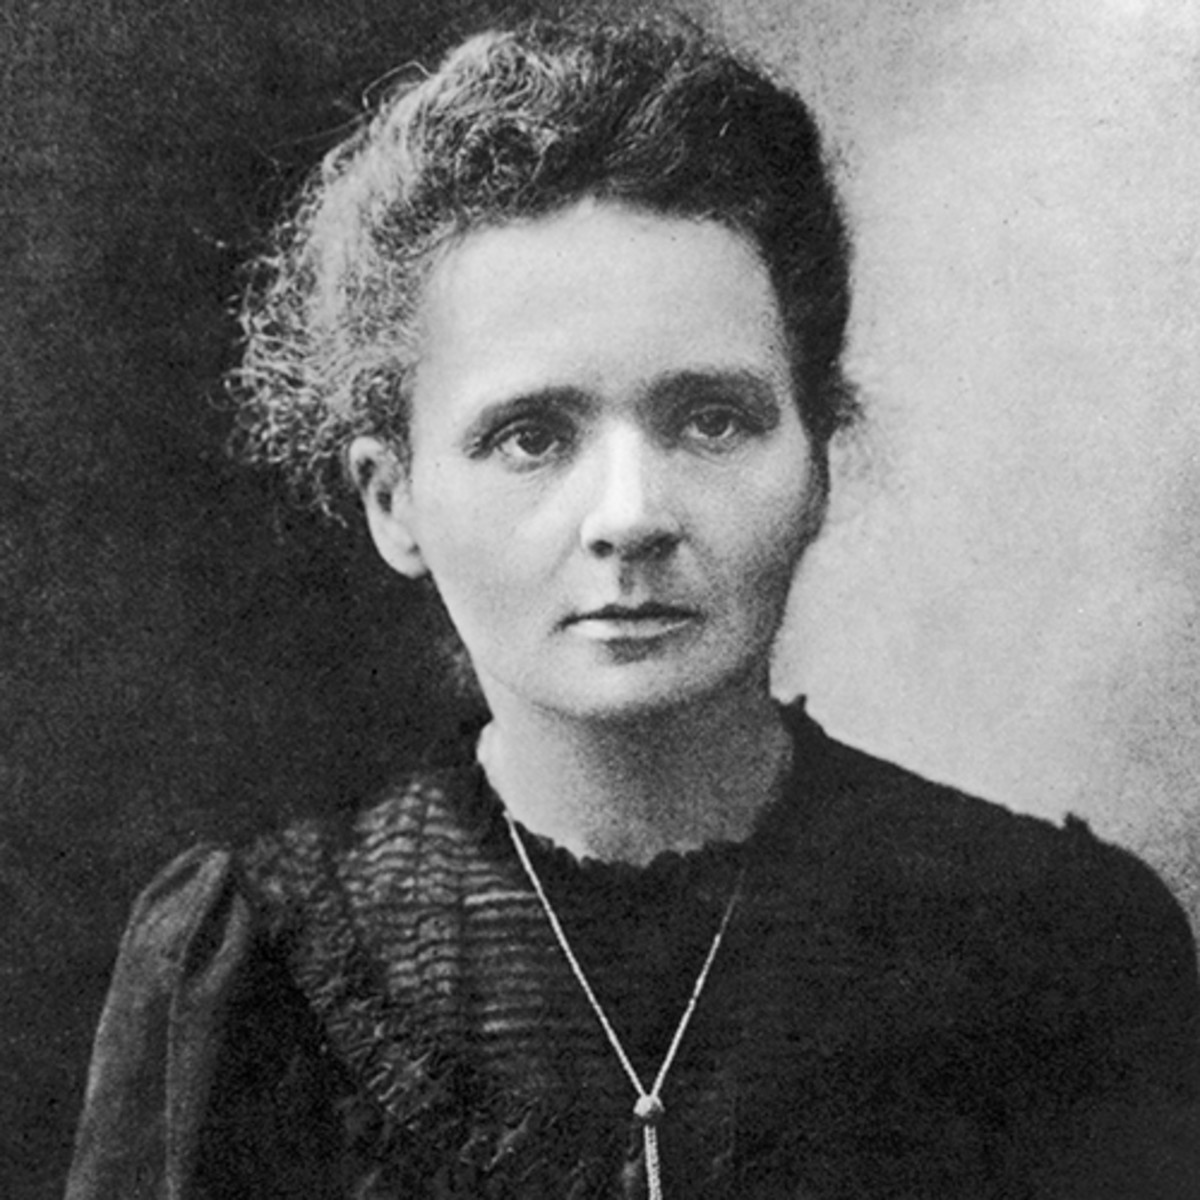 Marie Curie and her contributions to science